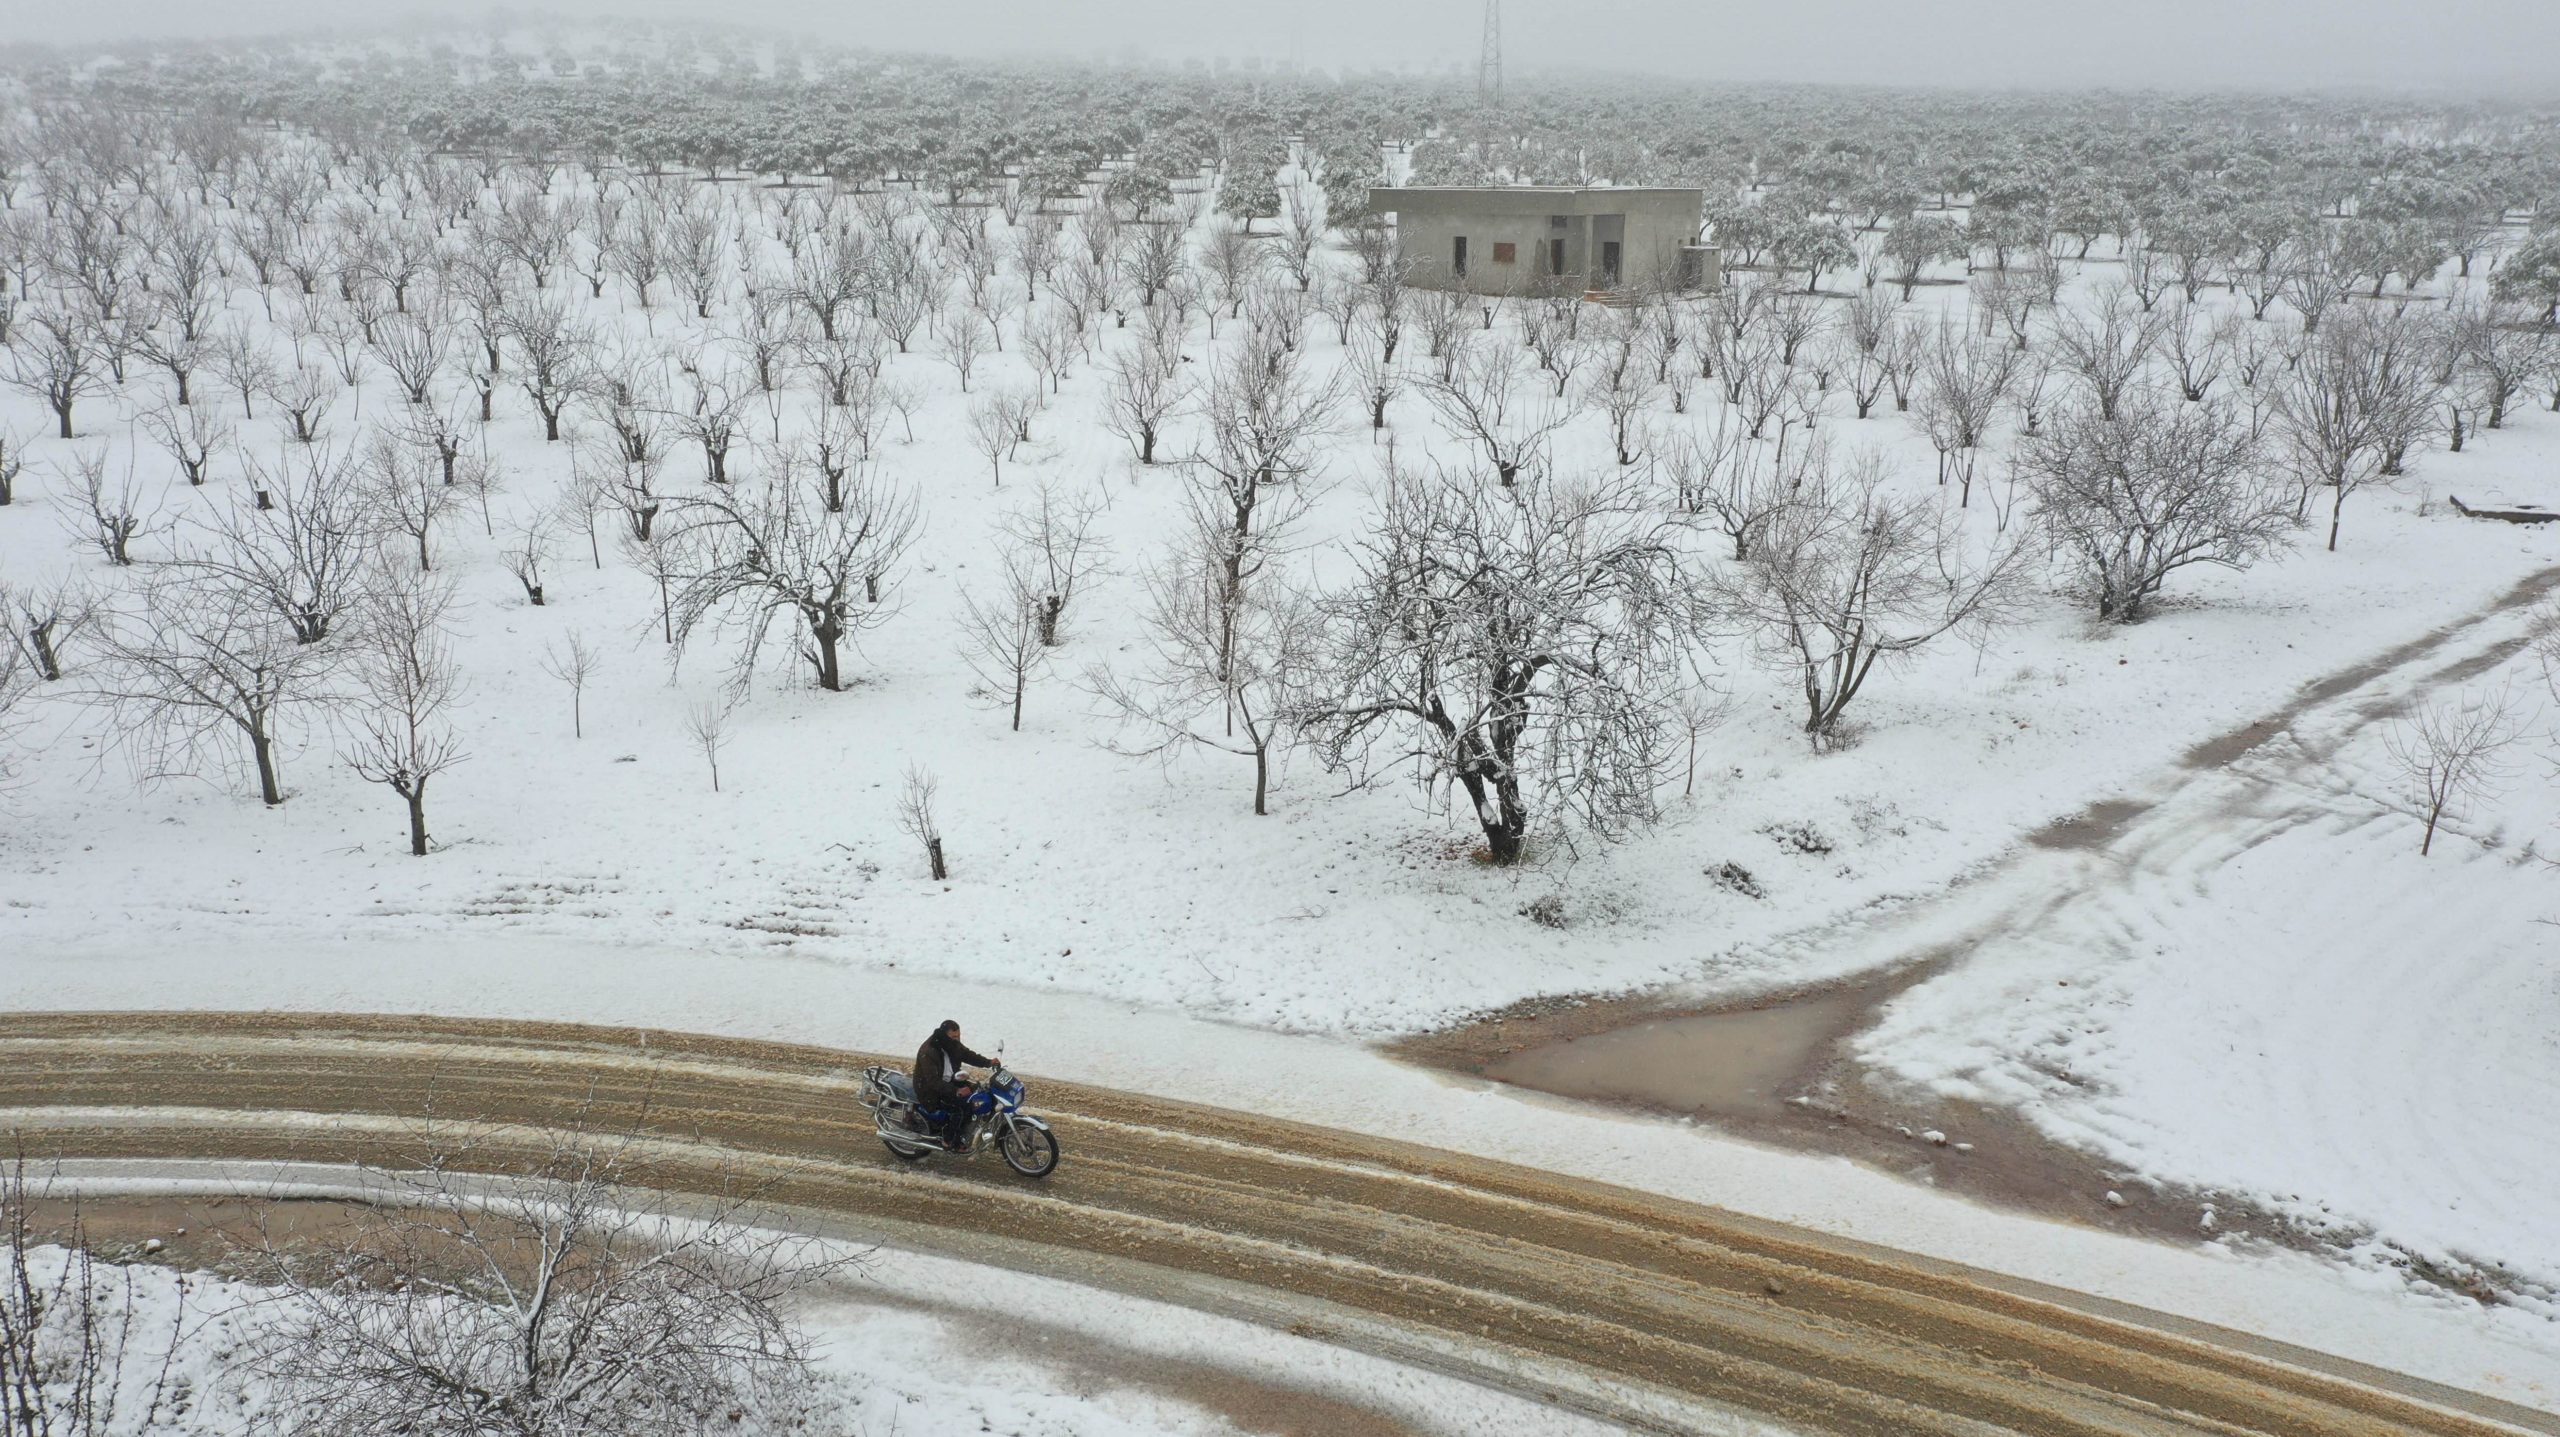  A Syrian man rides a motorcycle among groves covered with snow in the Jabal al-Zawiya region in the rebel-held northern countryside of Syria's Idlib province, on Feb. 17, 2021. (Photo: Omar Haj Khadour, Getty Images)